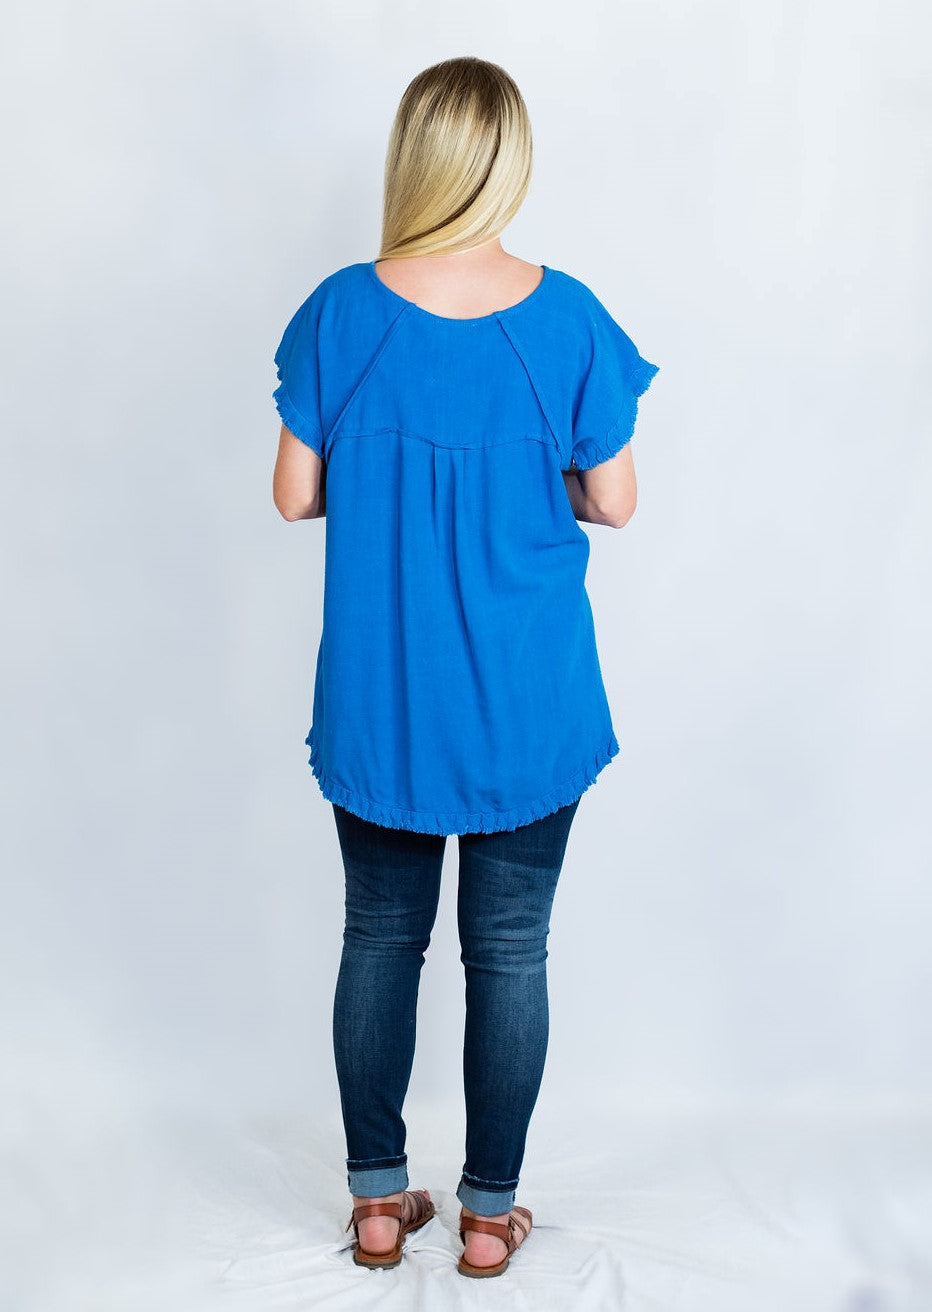 Pintuck High-Low Frayed Hem Linen Tunic Top by Umgee Clothing